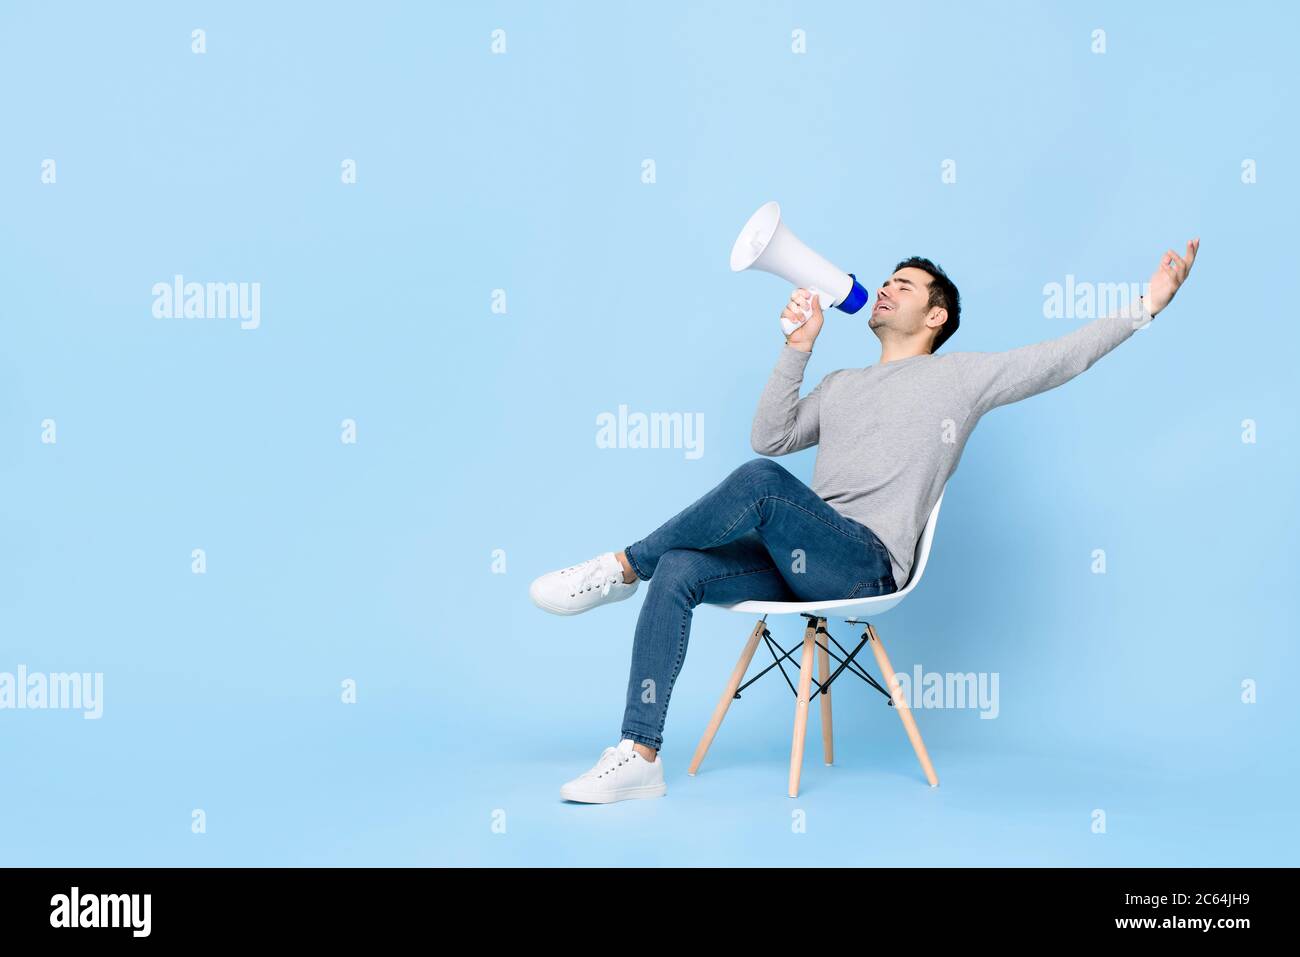 Portrait of young handsome Caucasian man sitting and cheerfully announcing on megaphone with one arm raised in isolated studio blue background Stock Photo